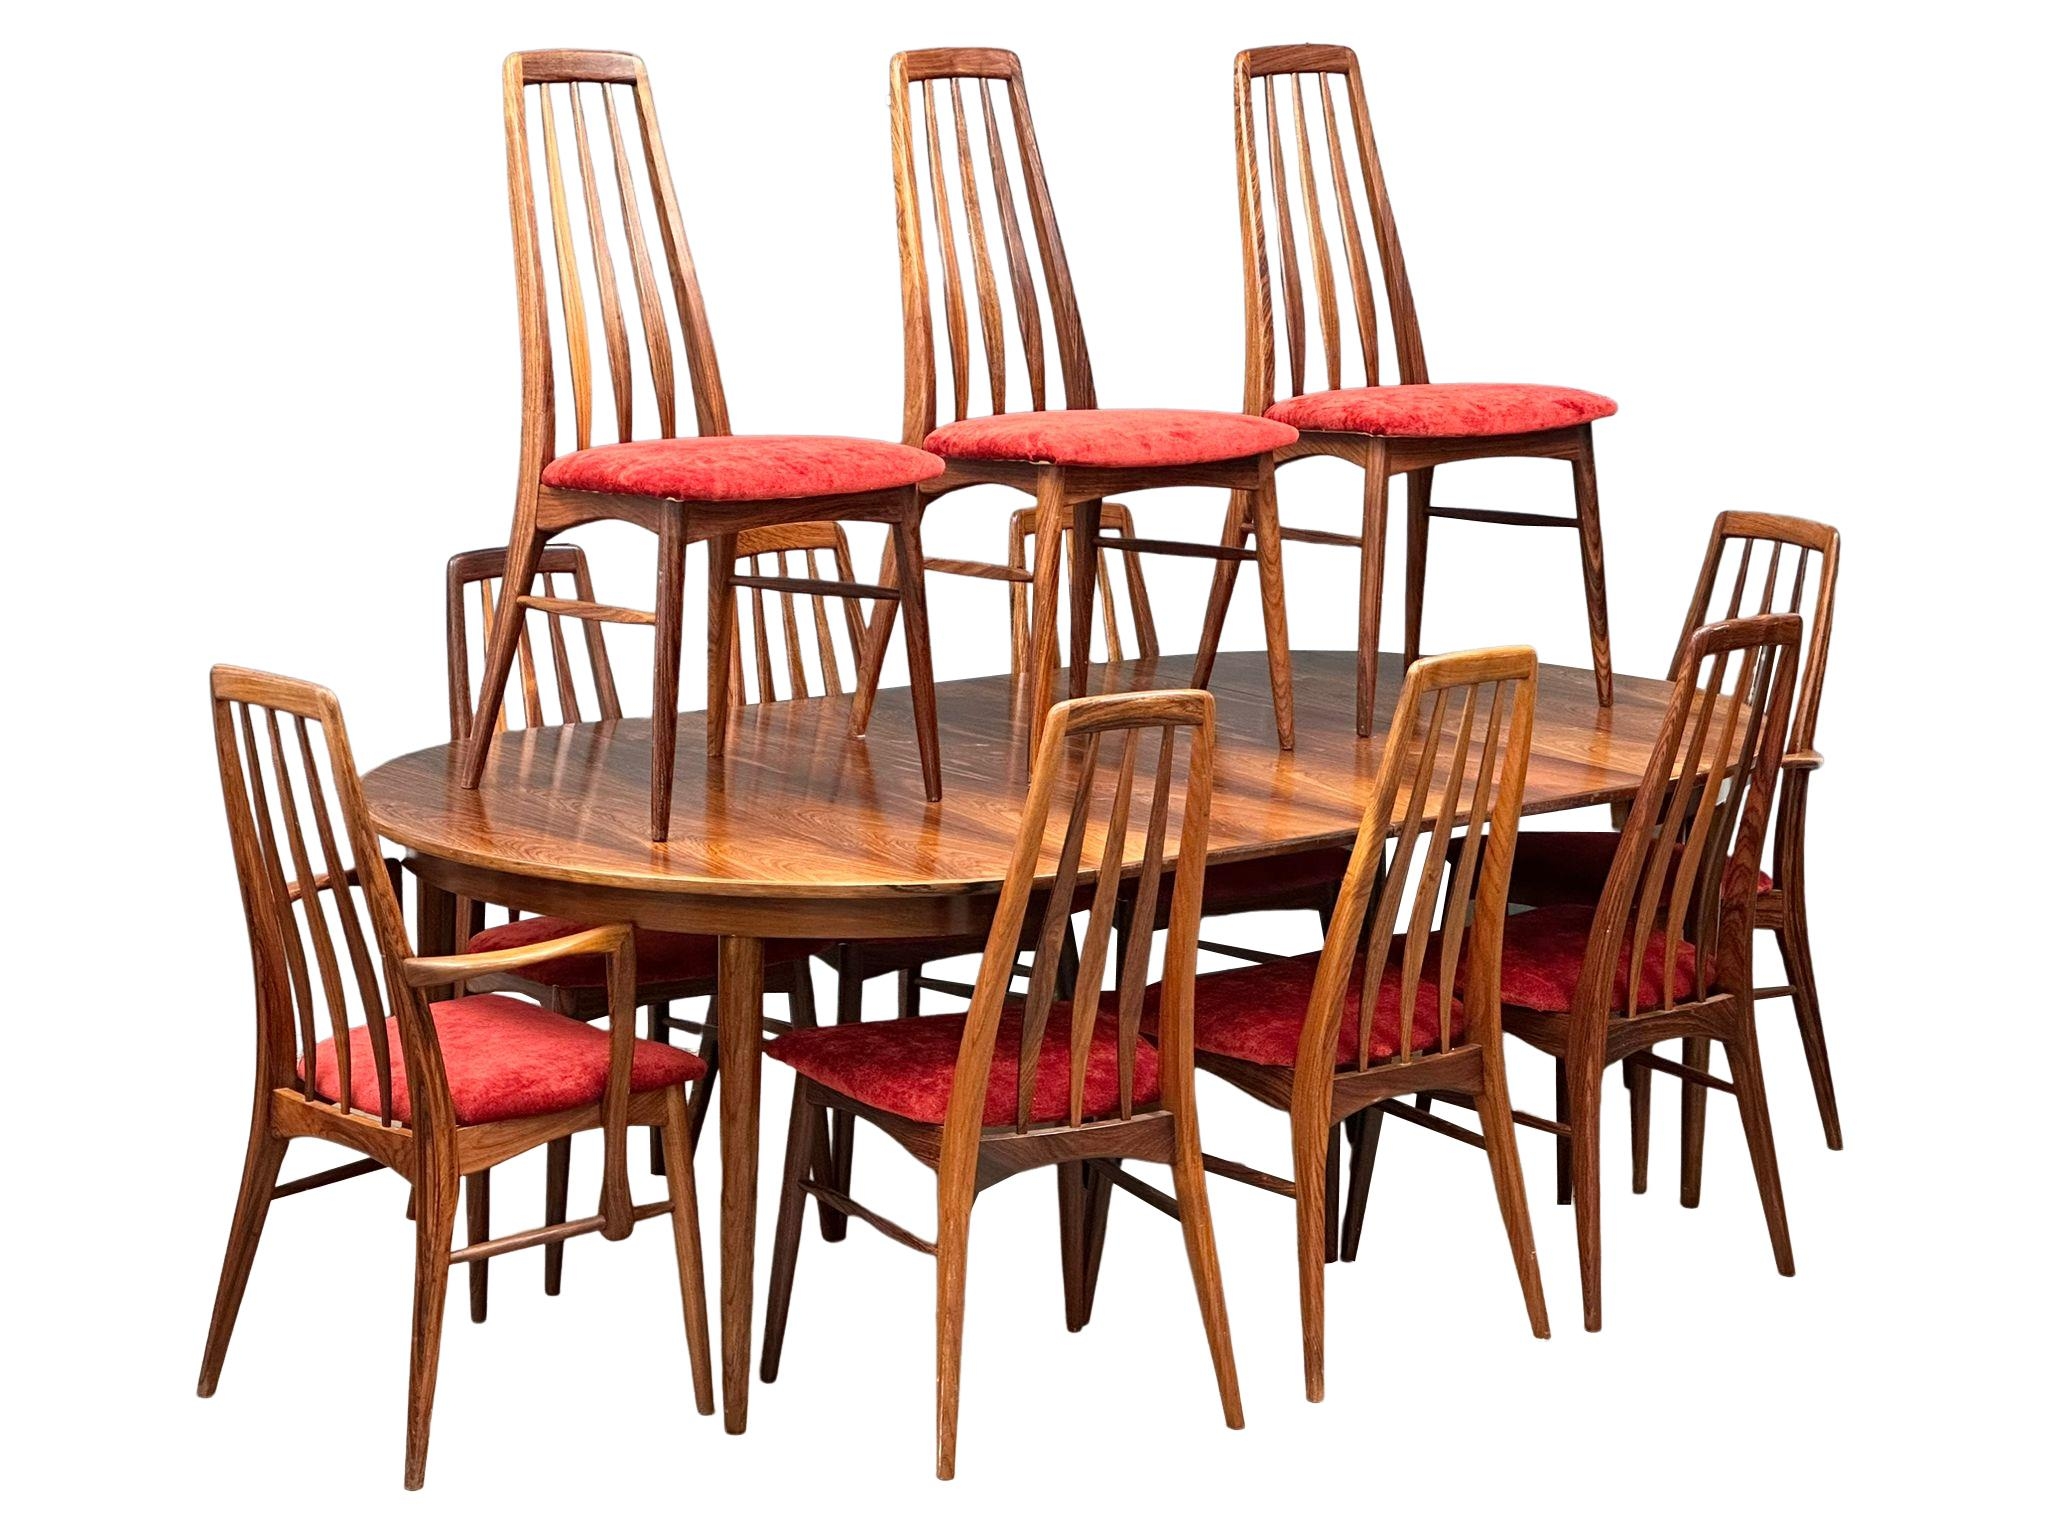 An exceptional quality rare set of 11 Danish Mid Century rosewood ‘Eva’ chairs, designed by Niels